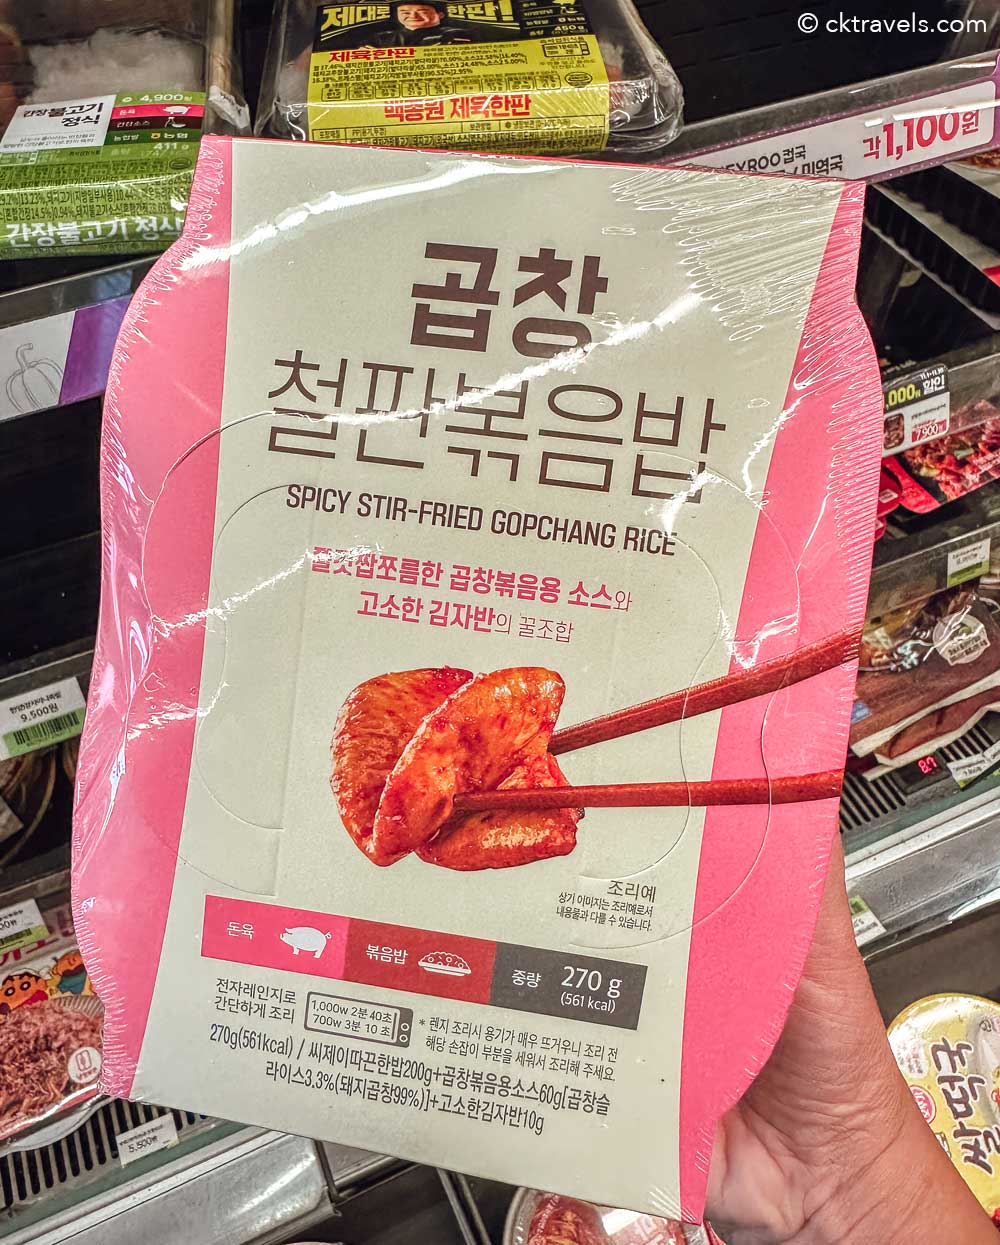 spicy stir-fried gopchang rice from CU convenience stores in South Korea